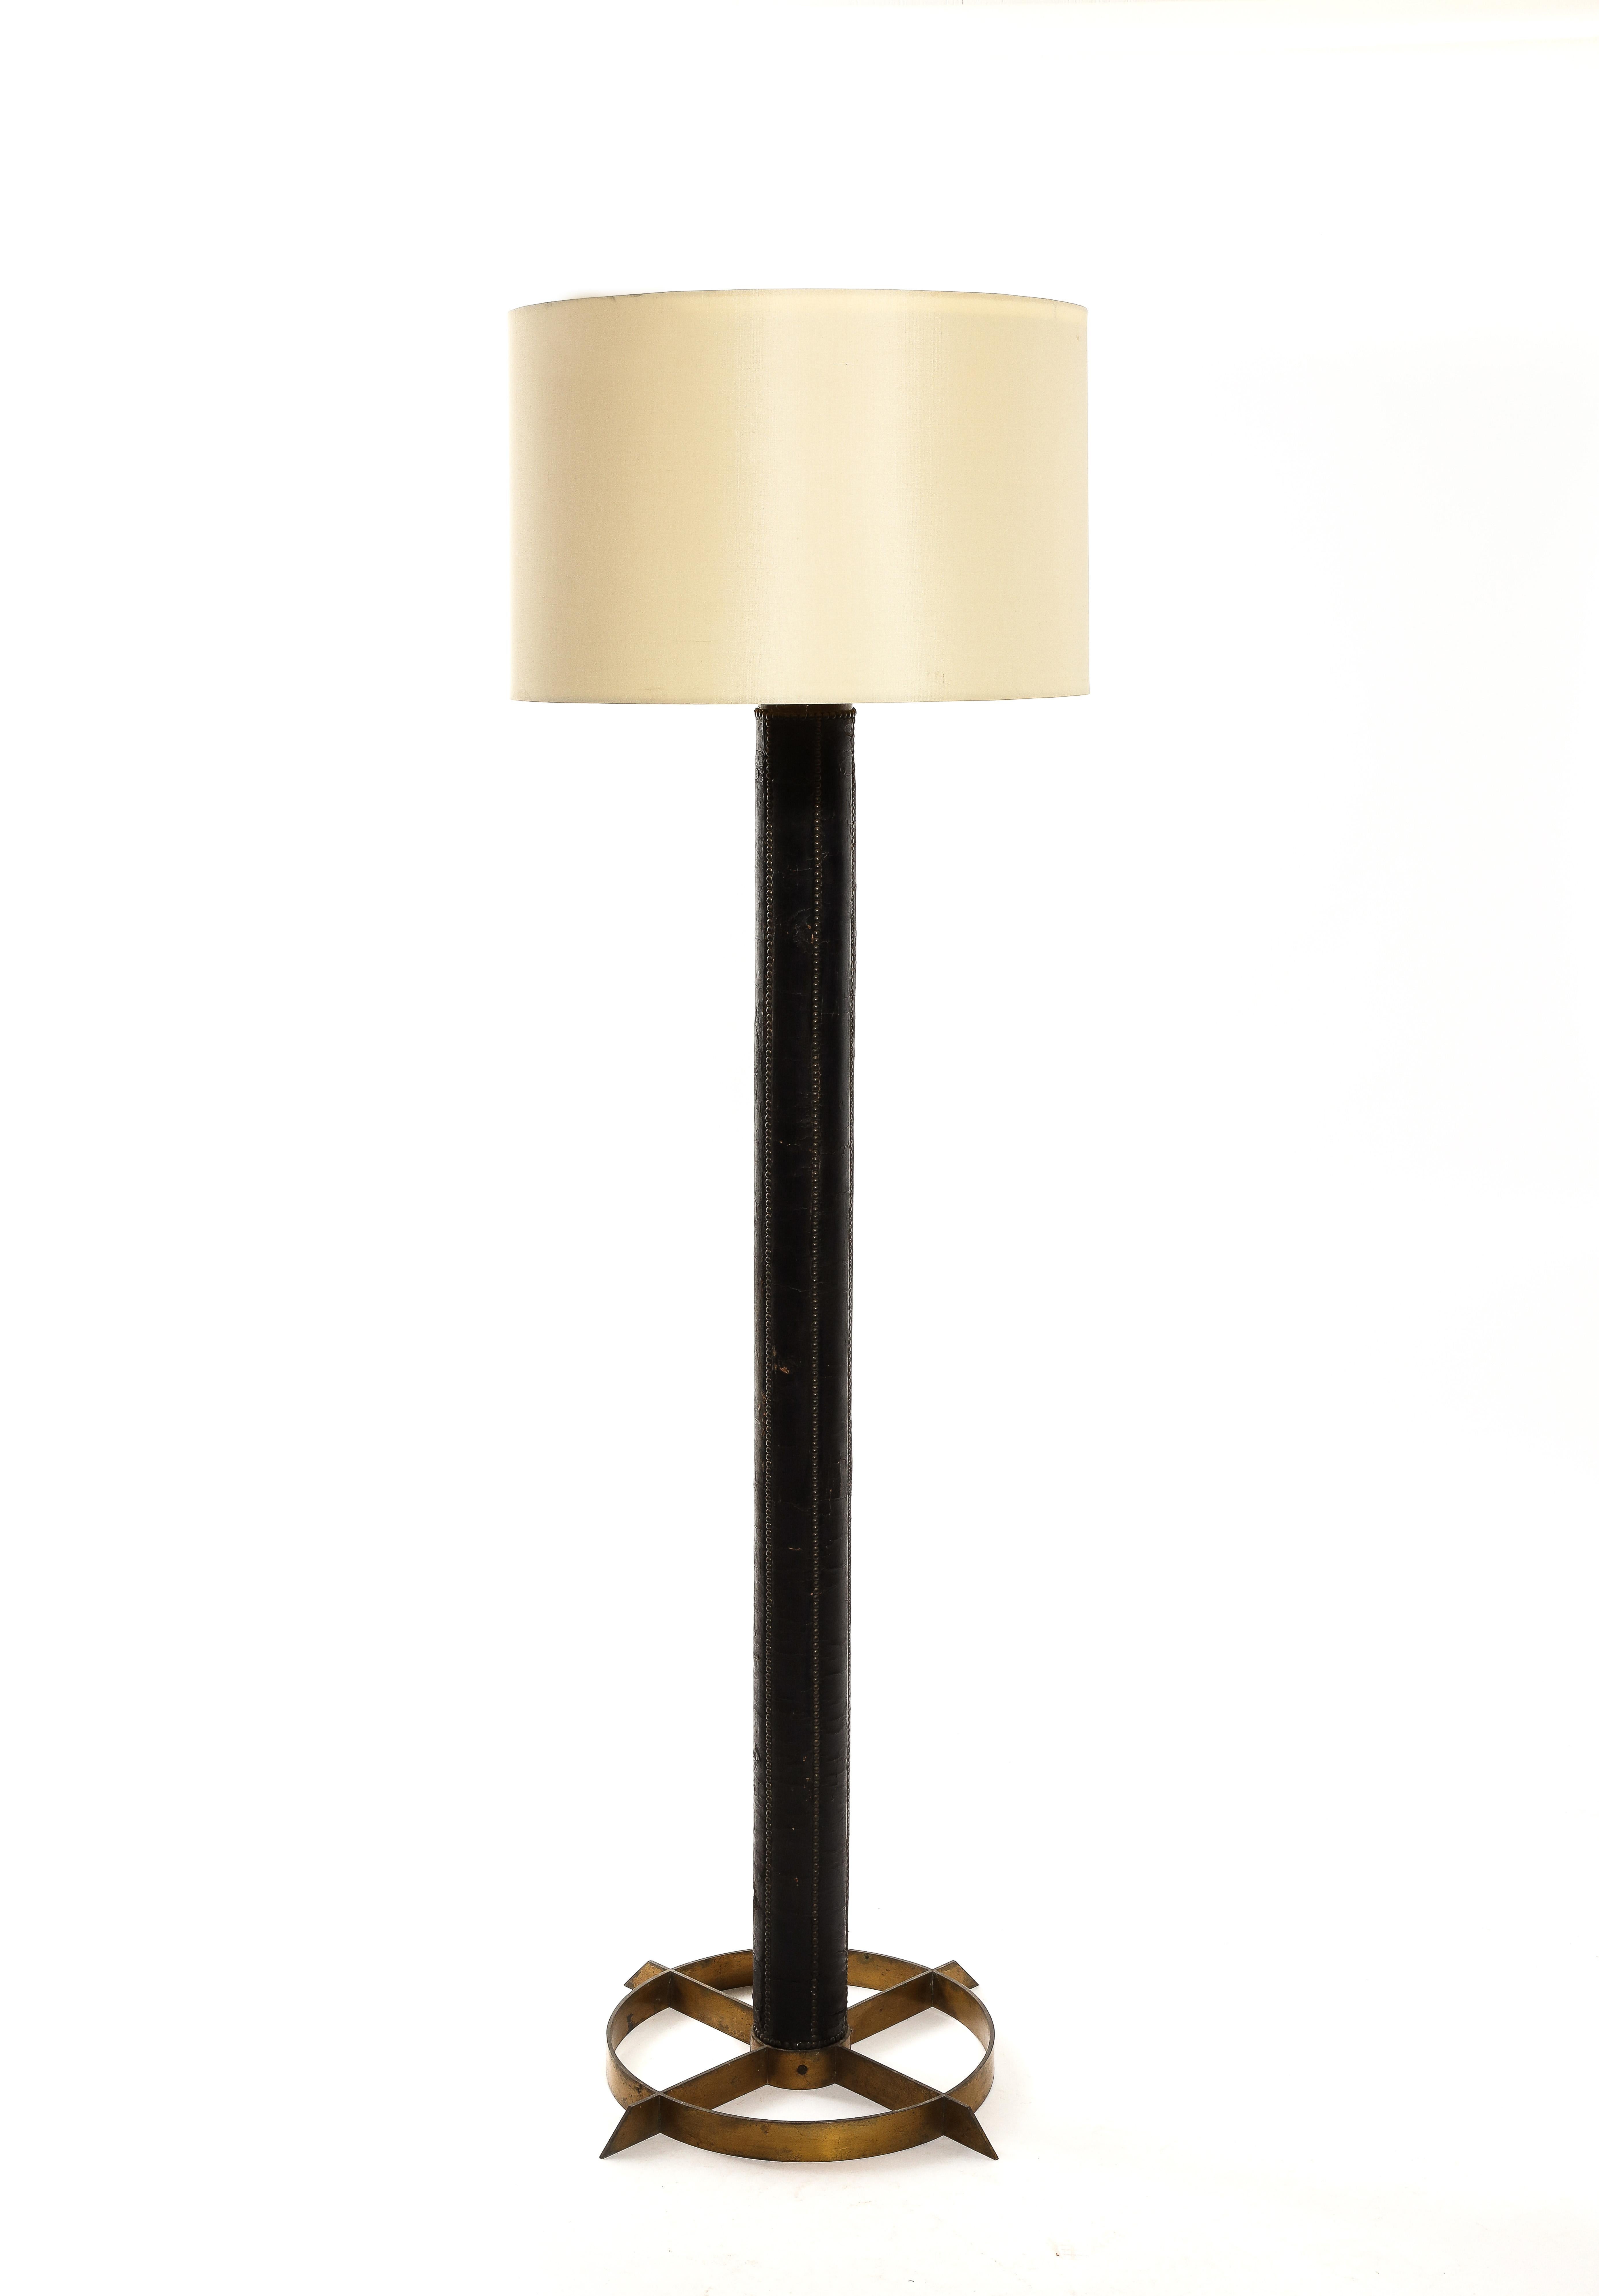 Nail Studded Leather Floor Lamp, France 1960s For Sale 5